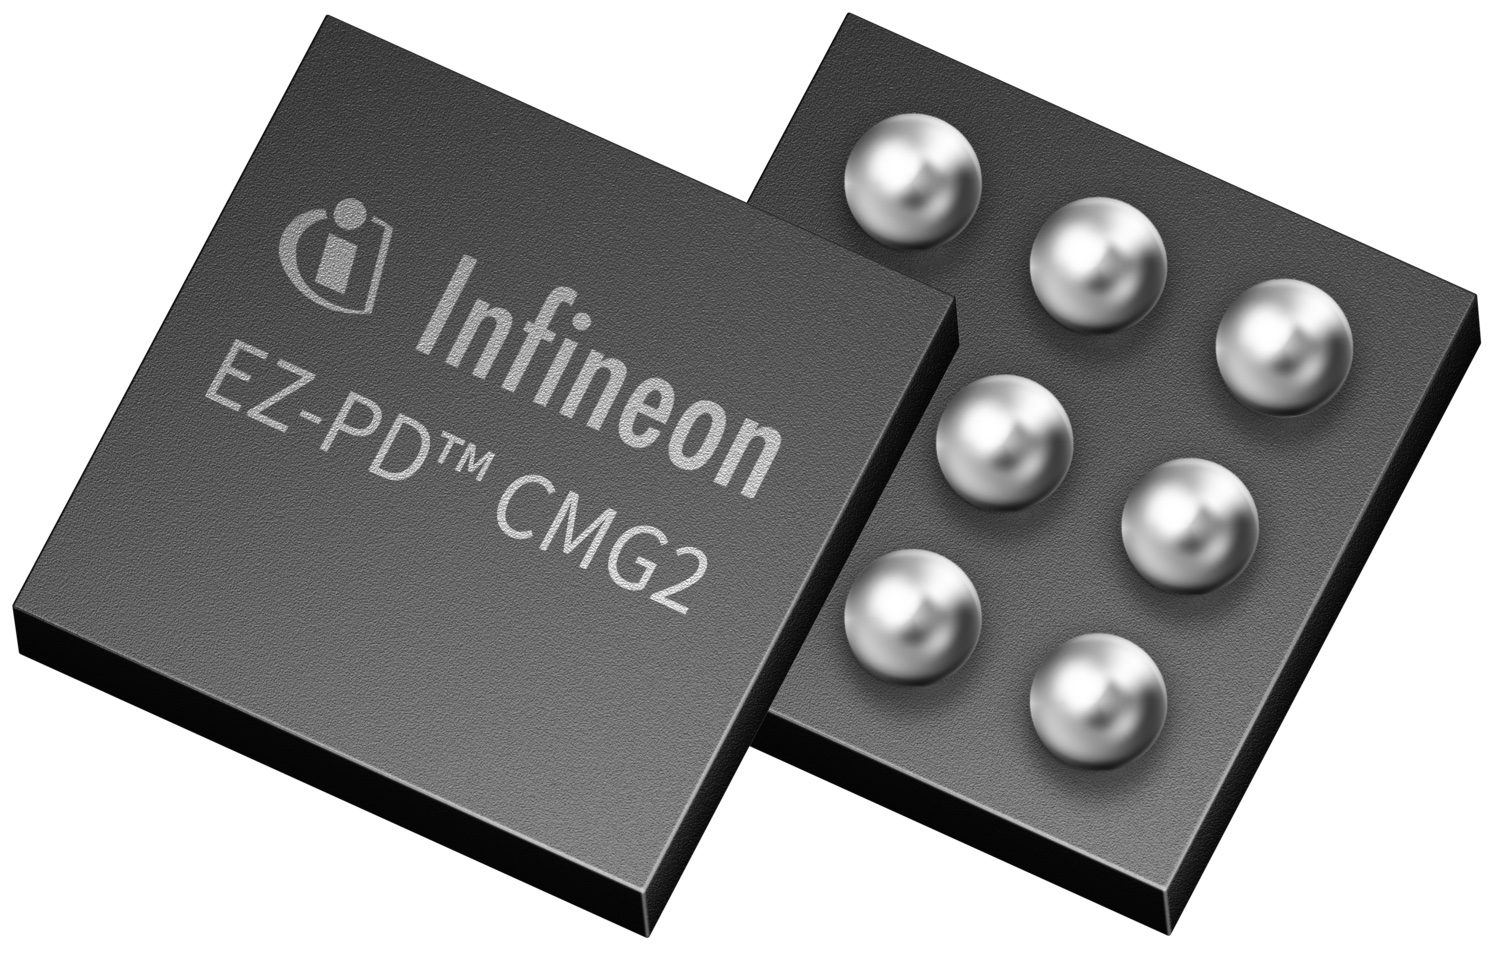 Infineon Launches an Electronically-Marked Cable Assembly Controller with EPR Supporting Protection up to 54 V for Passive USB-C Cables